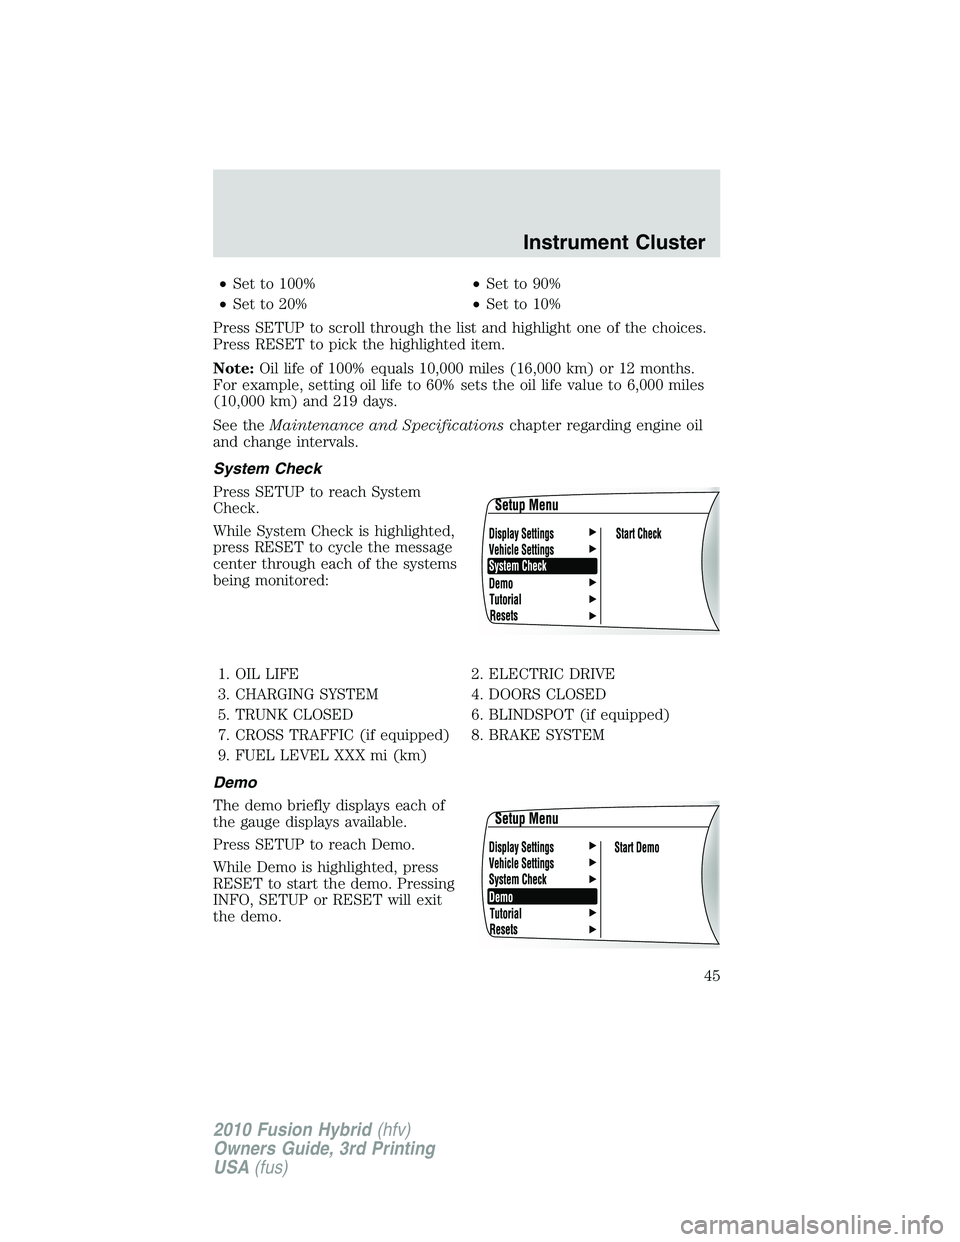 FORD FUSION HYBRID 2010  Owners Manual •Set to 100%•Set to 90%
•Set to 20%•Set to 10%
Press SETUP to scroll through the list and highlight one of the choices.
Press RESET to pick the highlighted item.
Note:Oil life of 100% equals 1